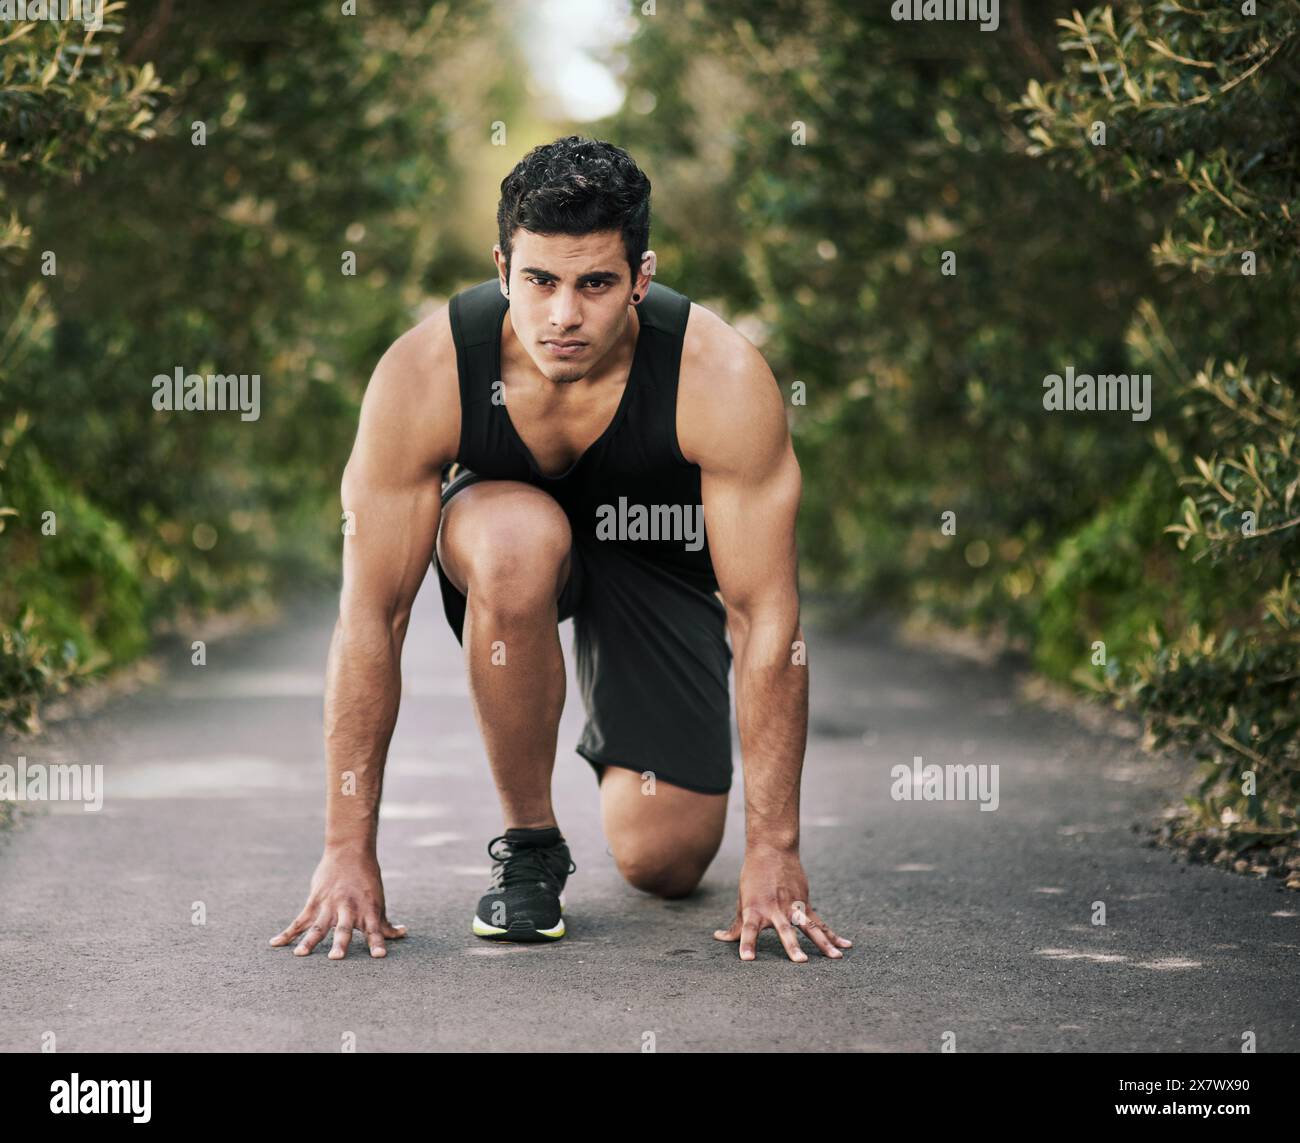 Man, runner or start of running in park, nature or sidewalk for outdoor exercise, race or fitness training. Male person, guy or Indian athlete ready Stock Photo